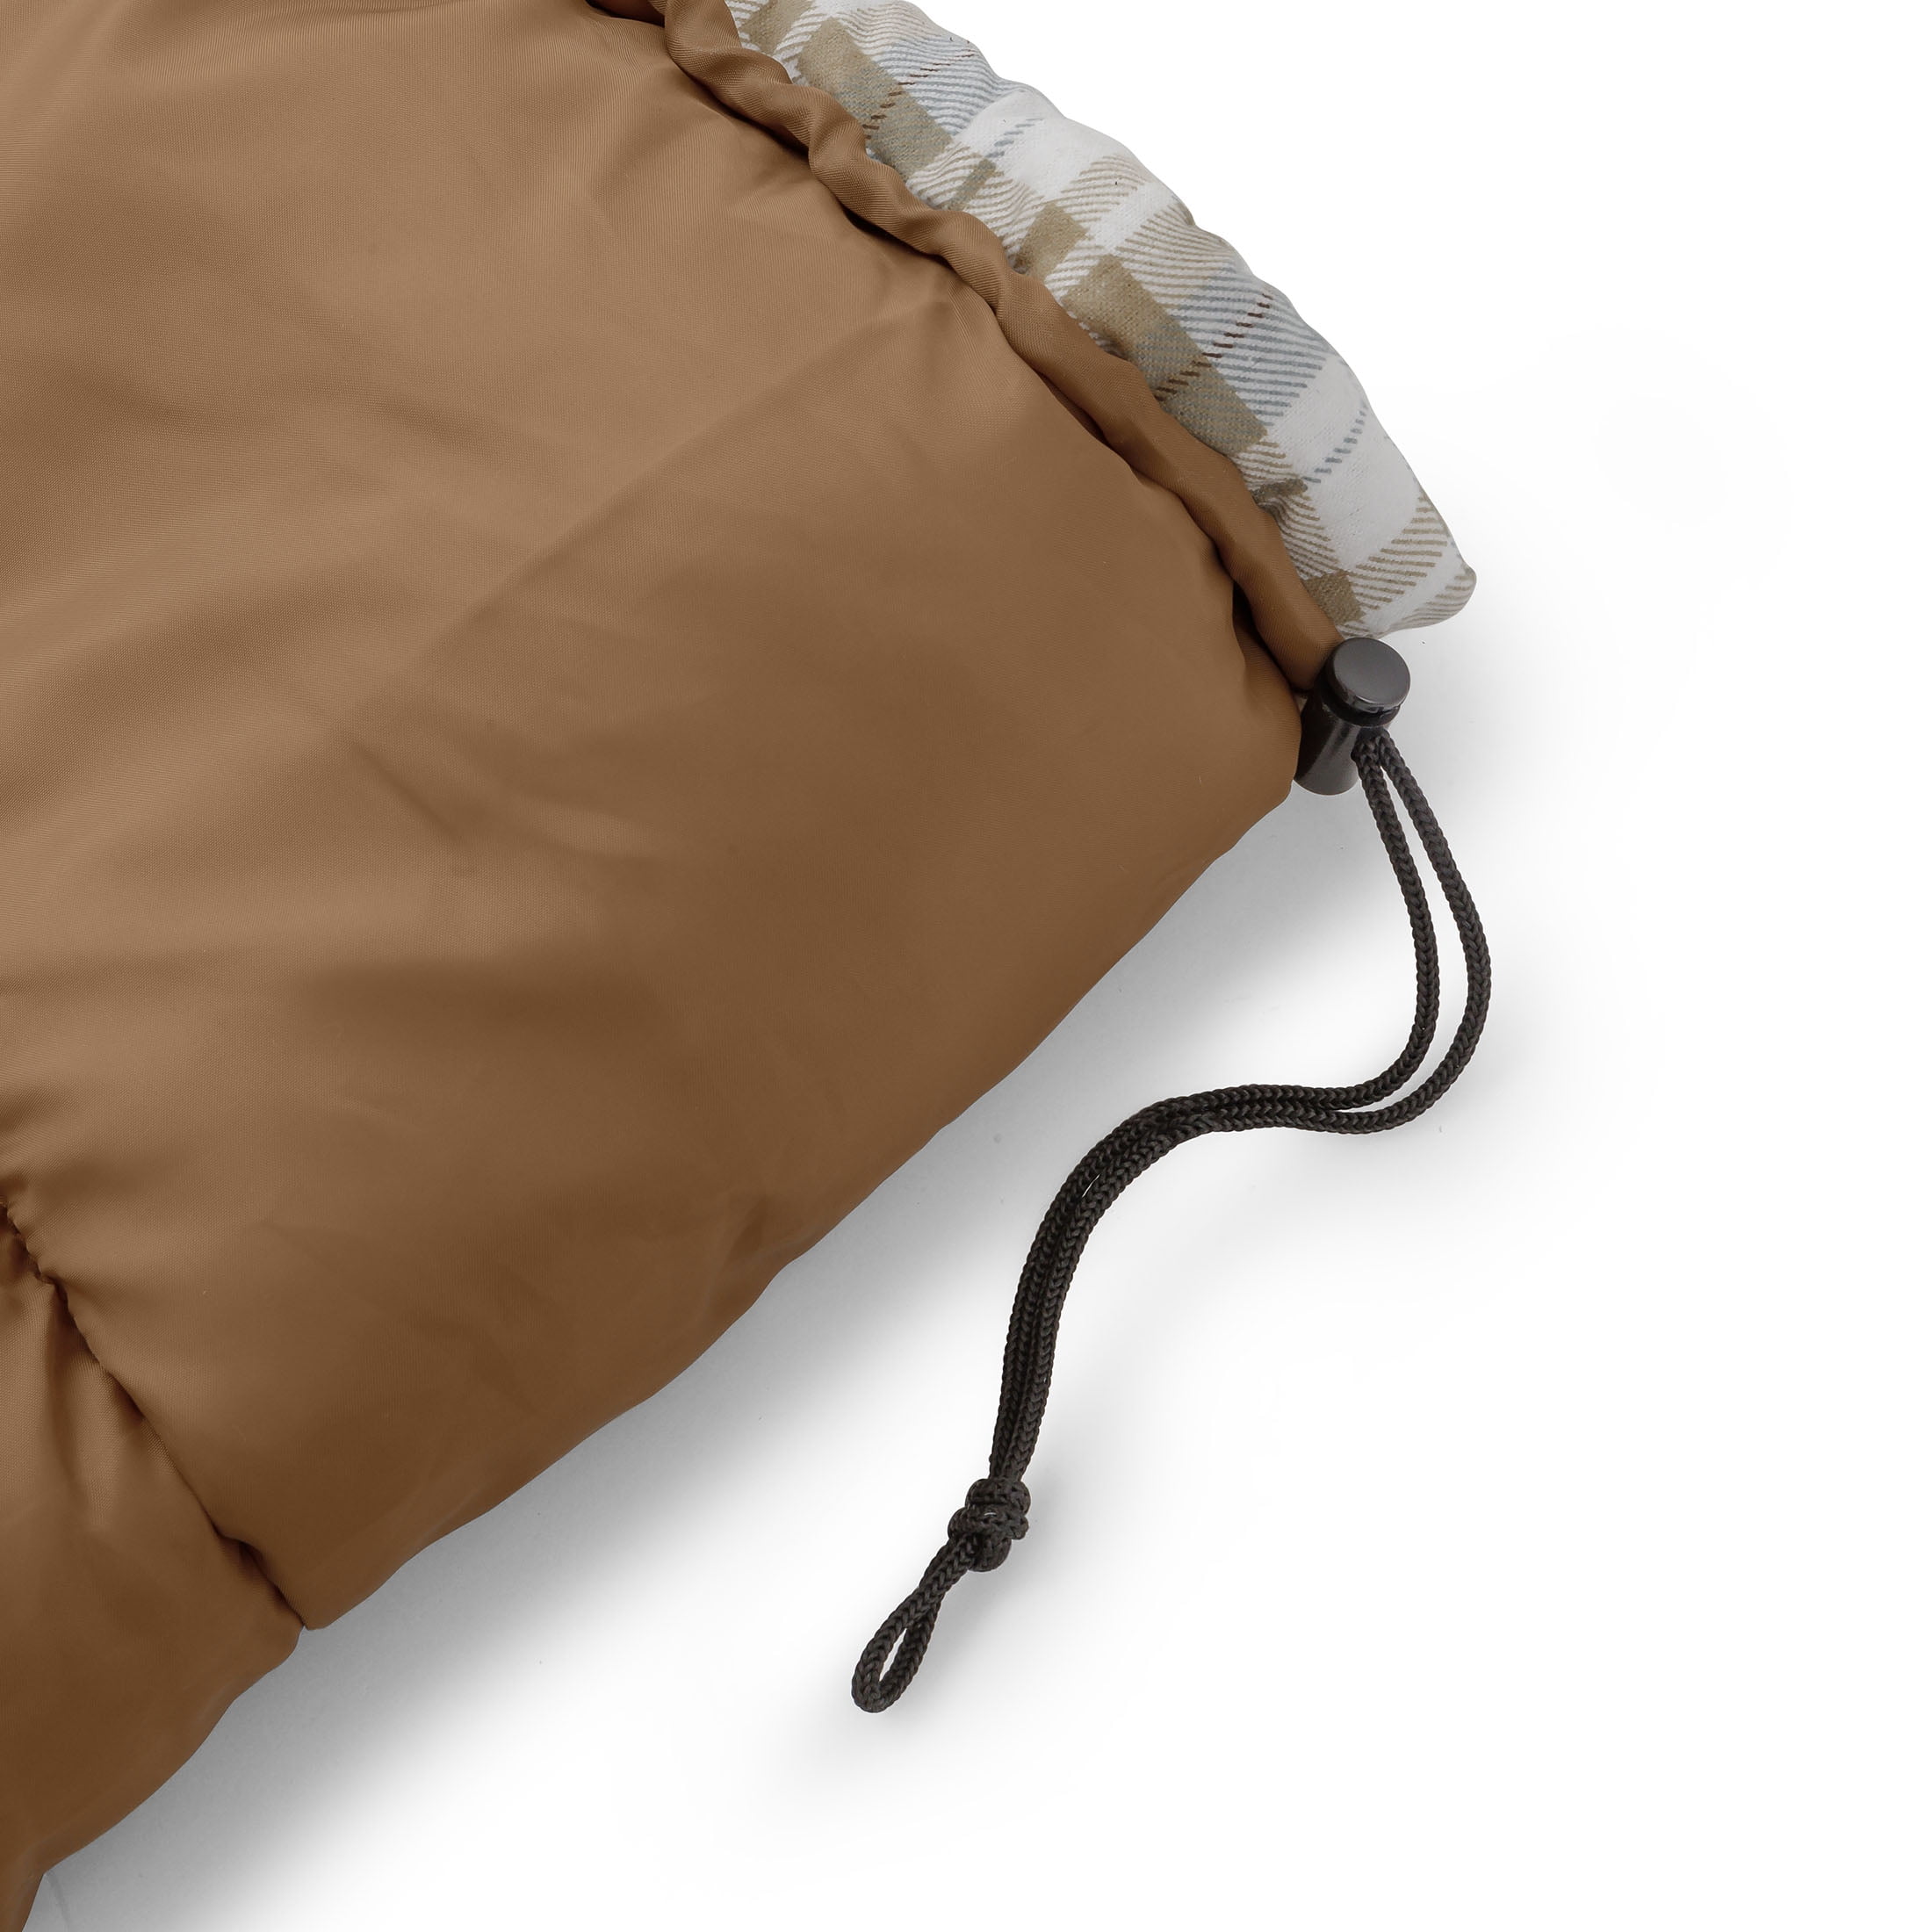 Ozark Trail 35F Flannel Lined Rectangle Adult Sleeping Bag - Brown (80